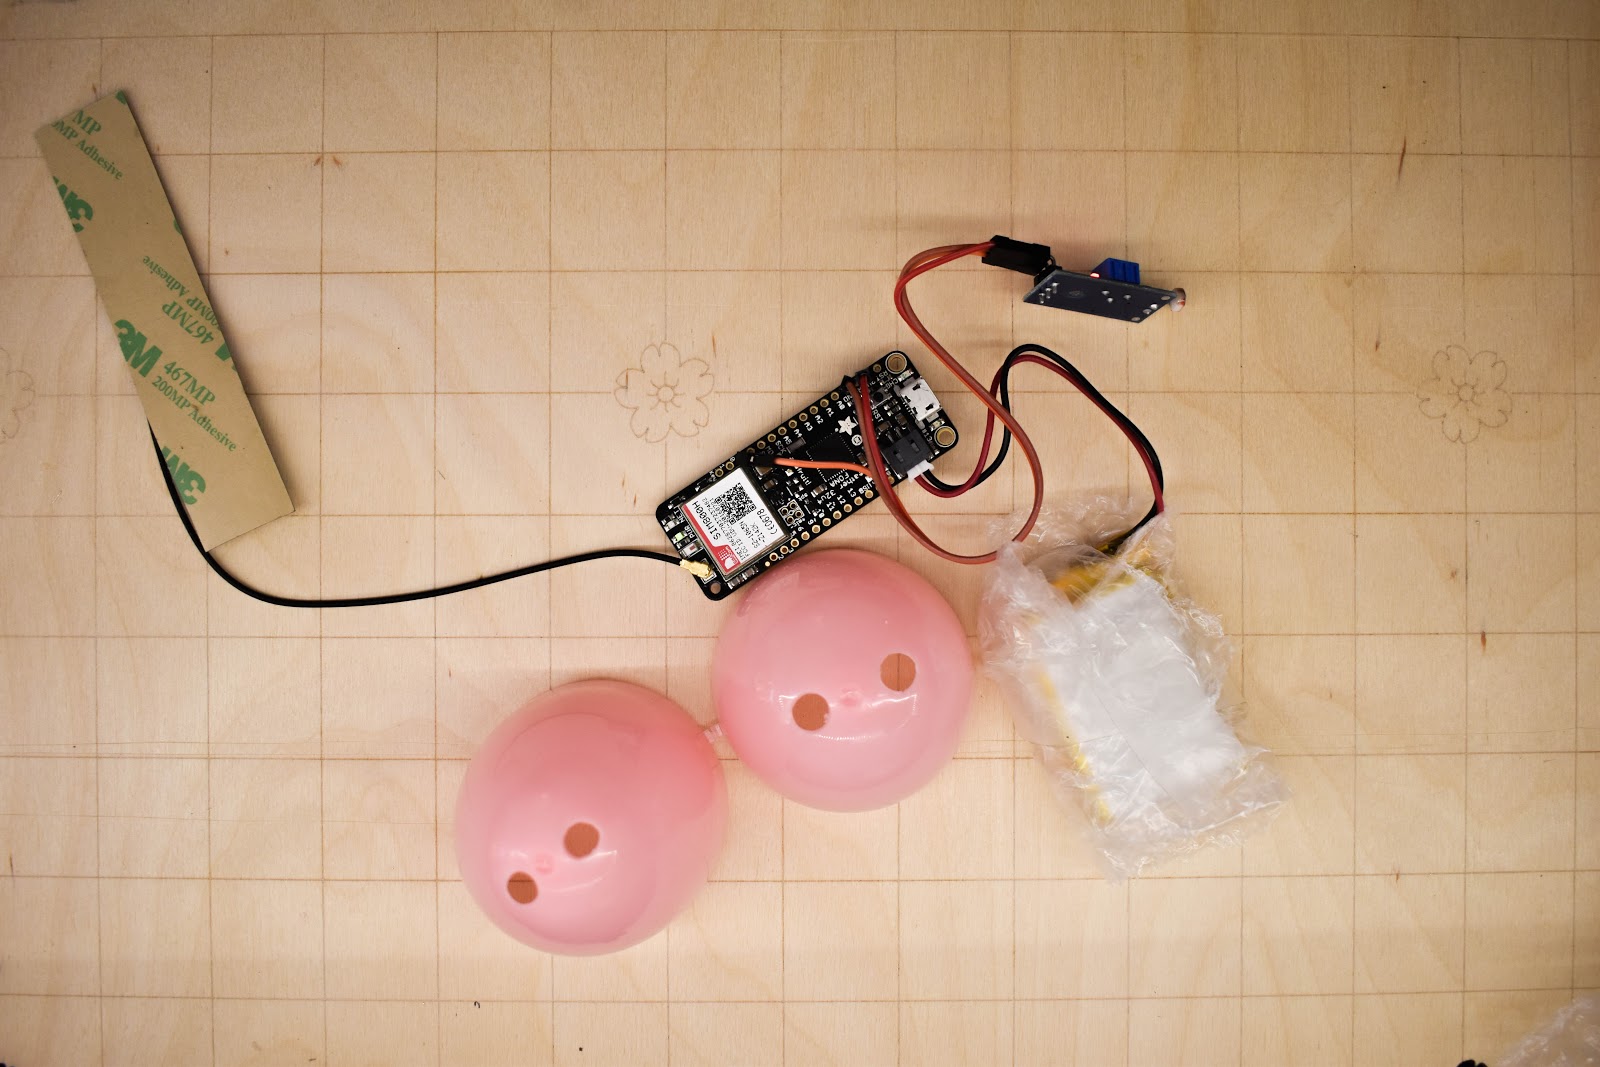 The Adafruit FONA with attached light sensor and battery. The battery is wrapped in bubble wrap. There is also an easter egg with four holes drilled in it.